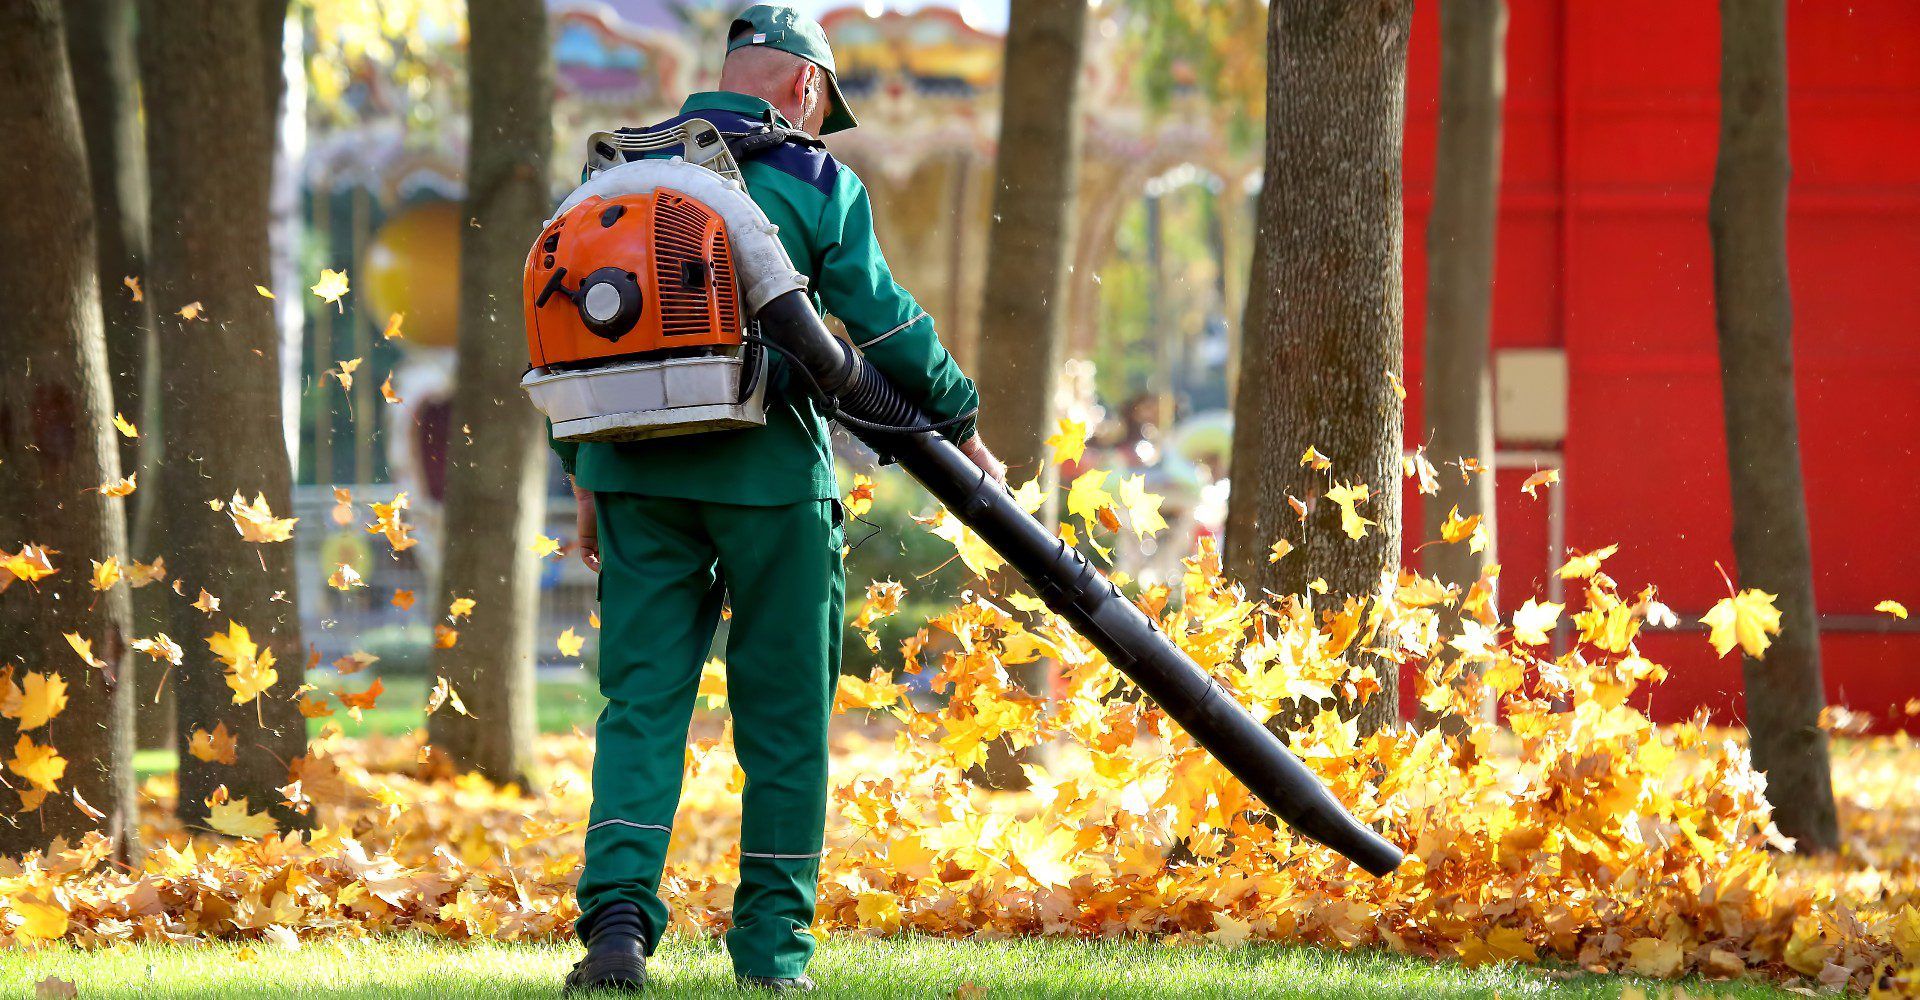 Winterize Your Yard Before the Snow Flies